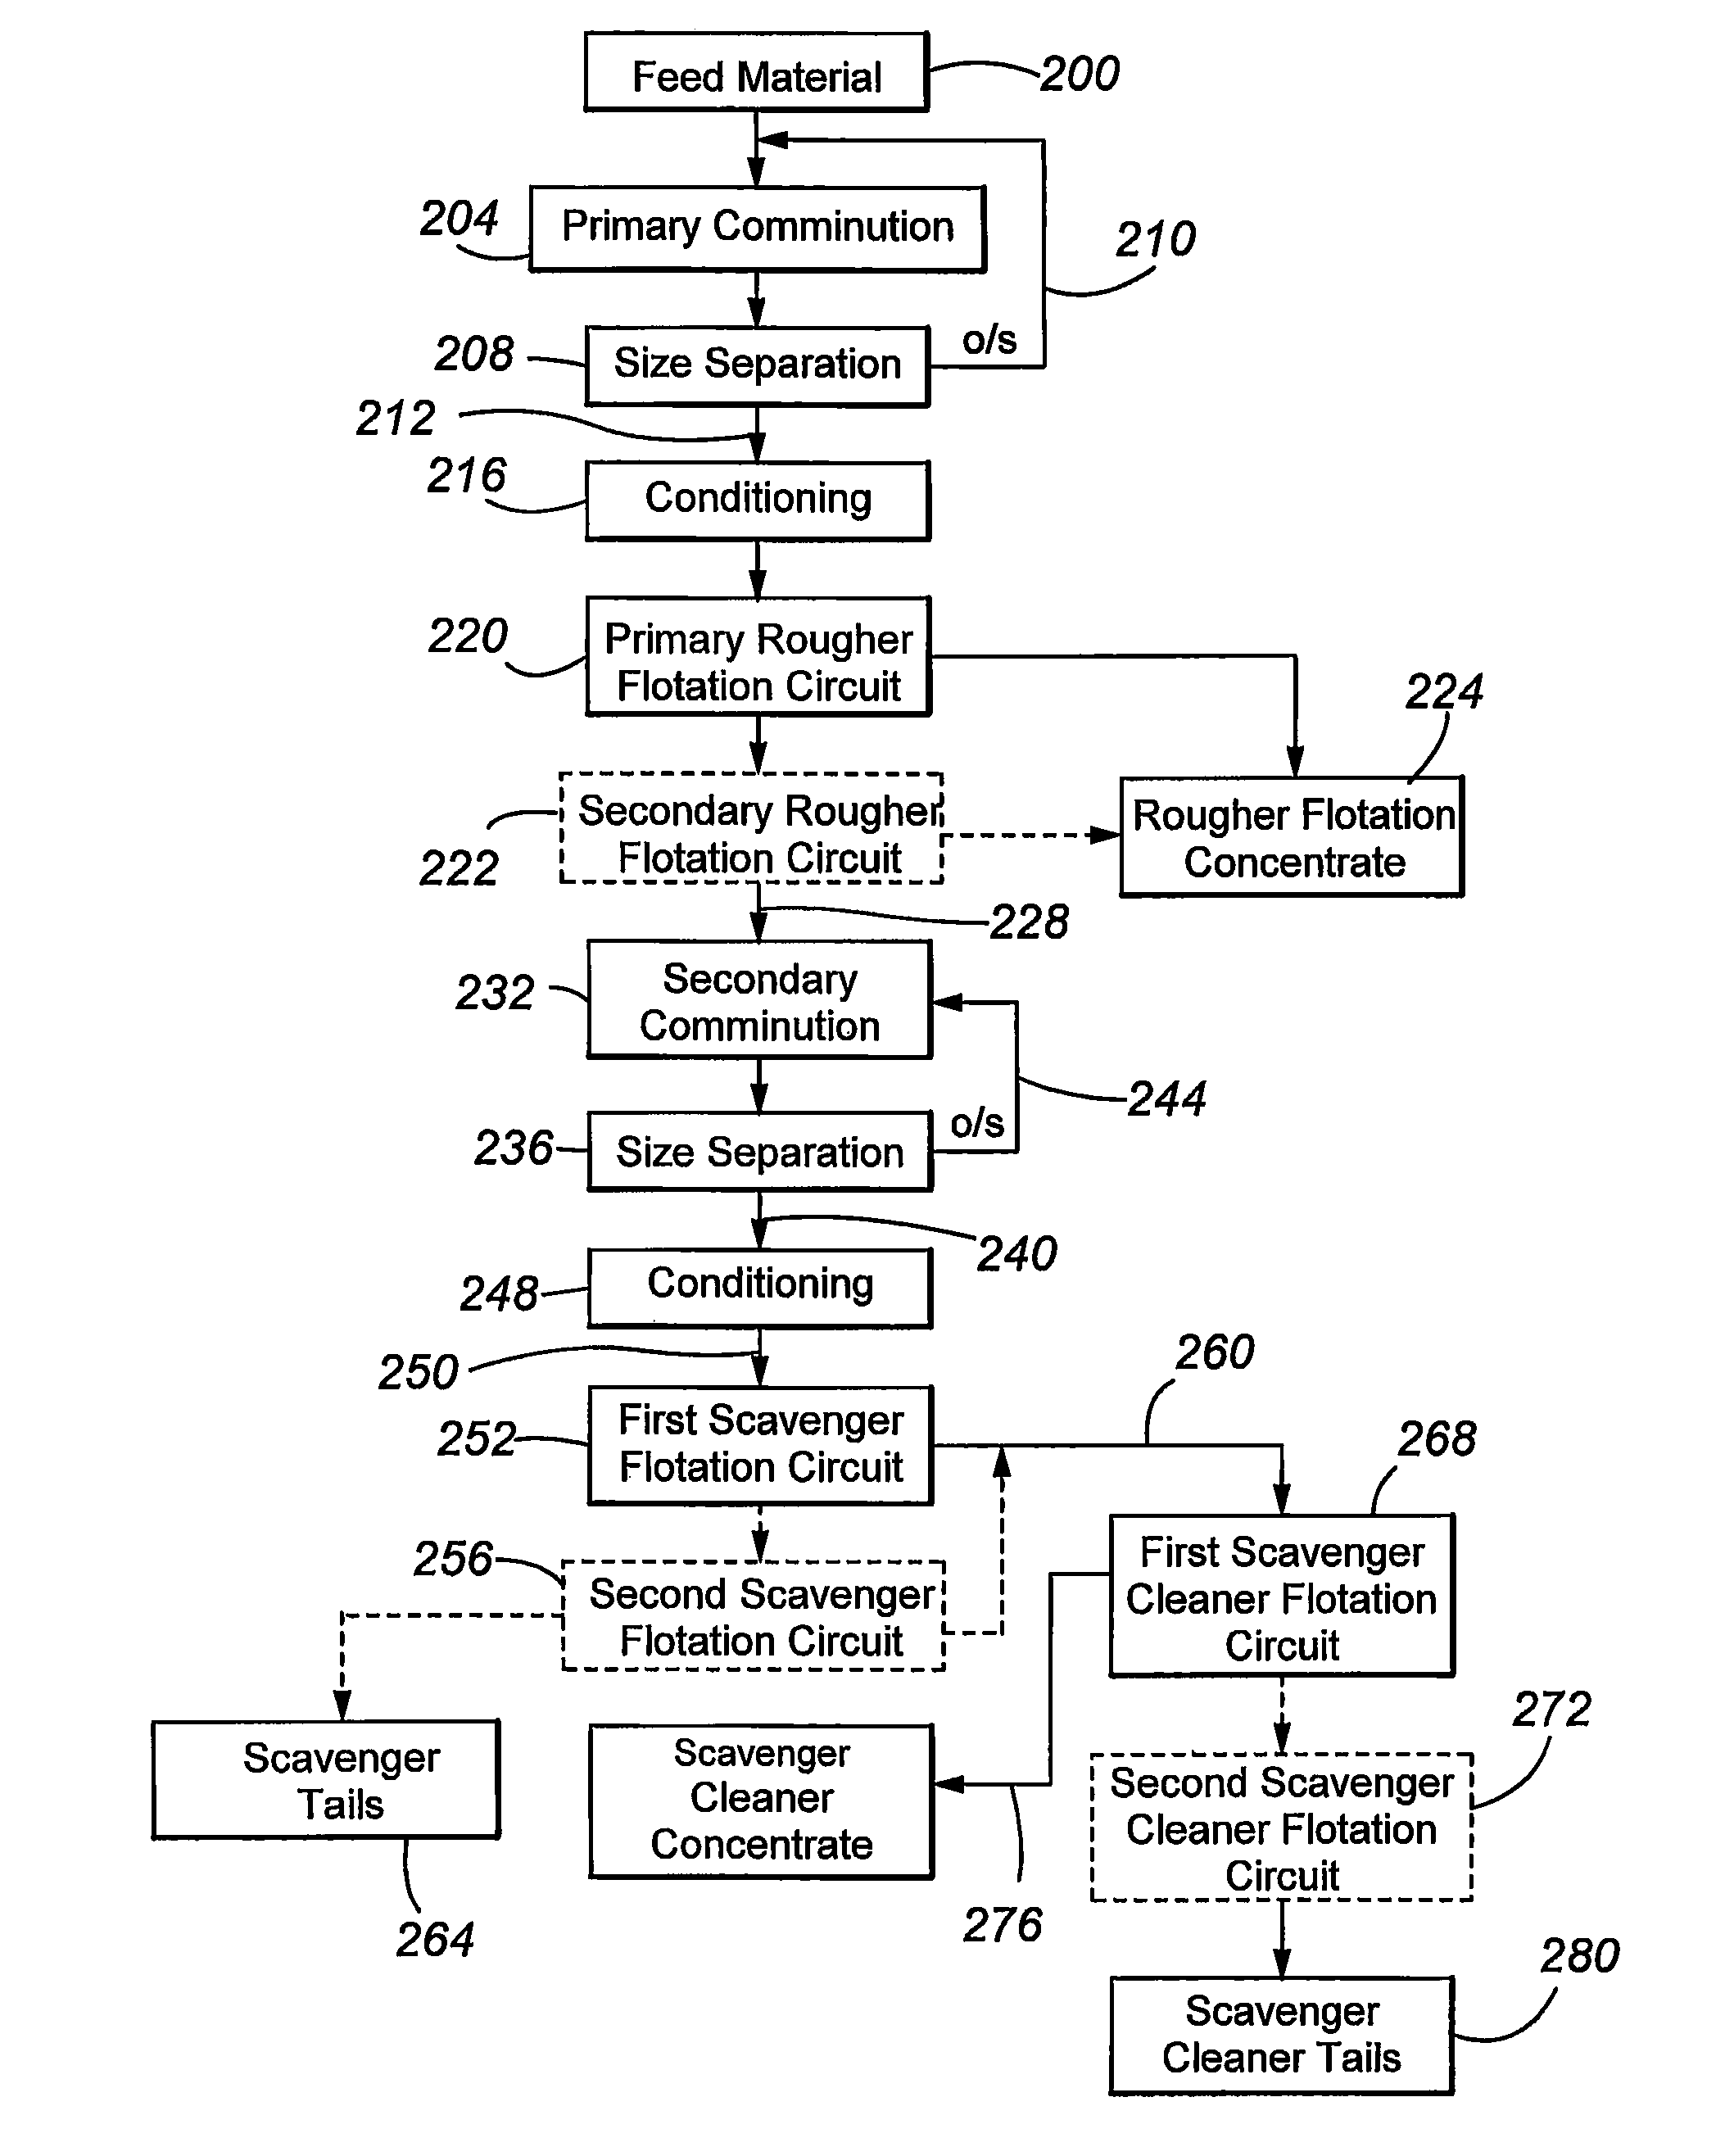 Process for recovering gold and silver from refractory ores